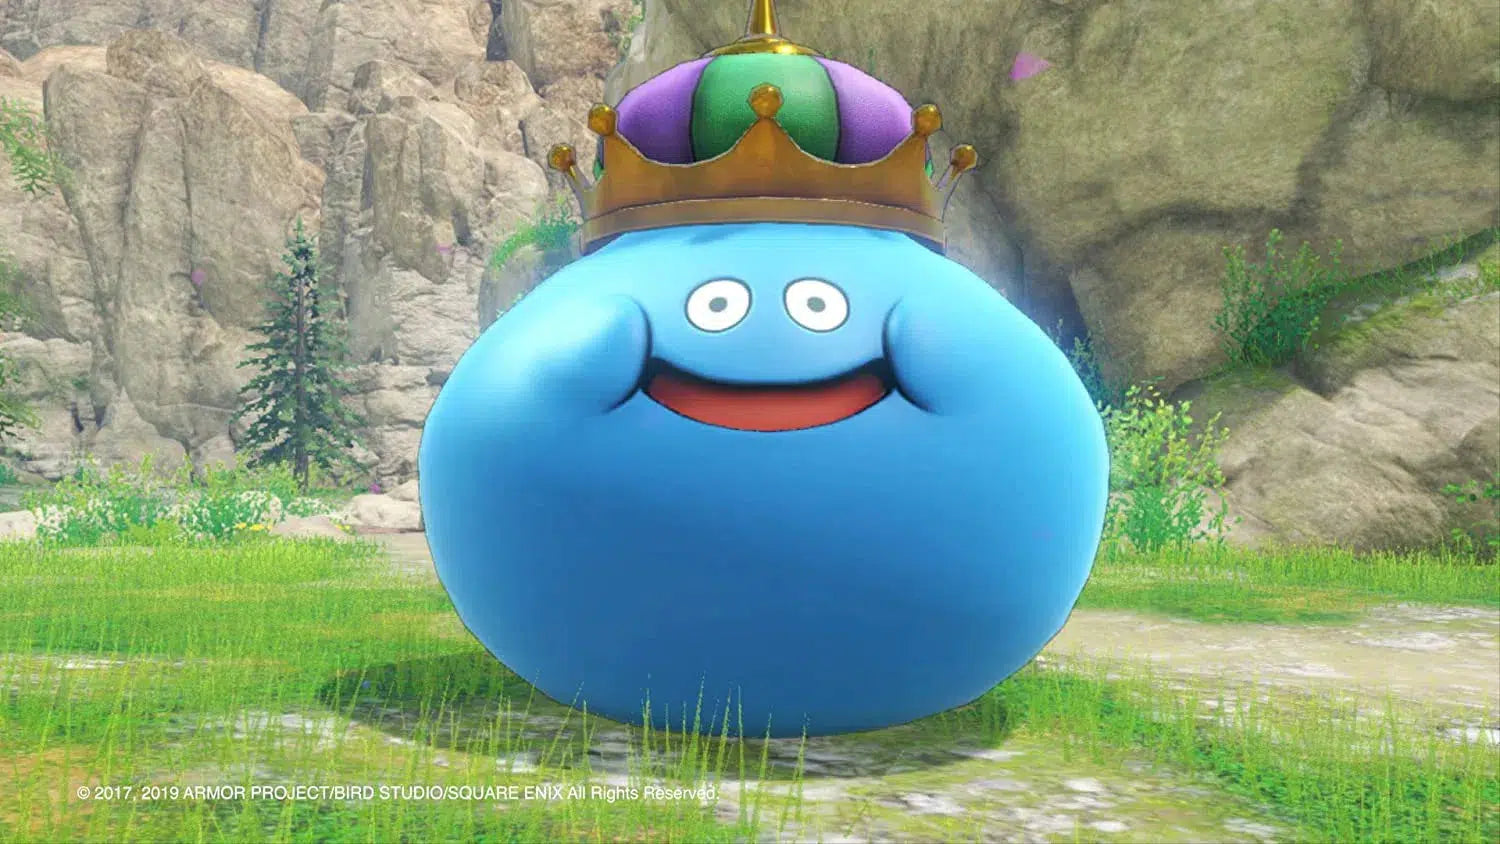 Dragon Quest XI S: Echoes of an Elusive Age (Definitive Edition) - Nintendo Switch